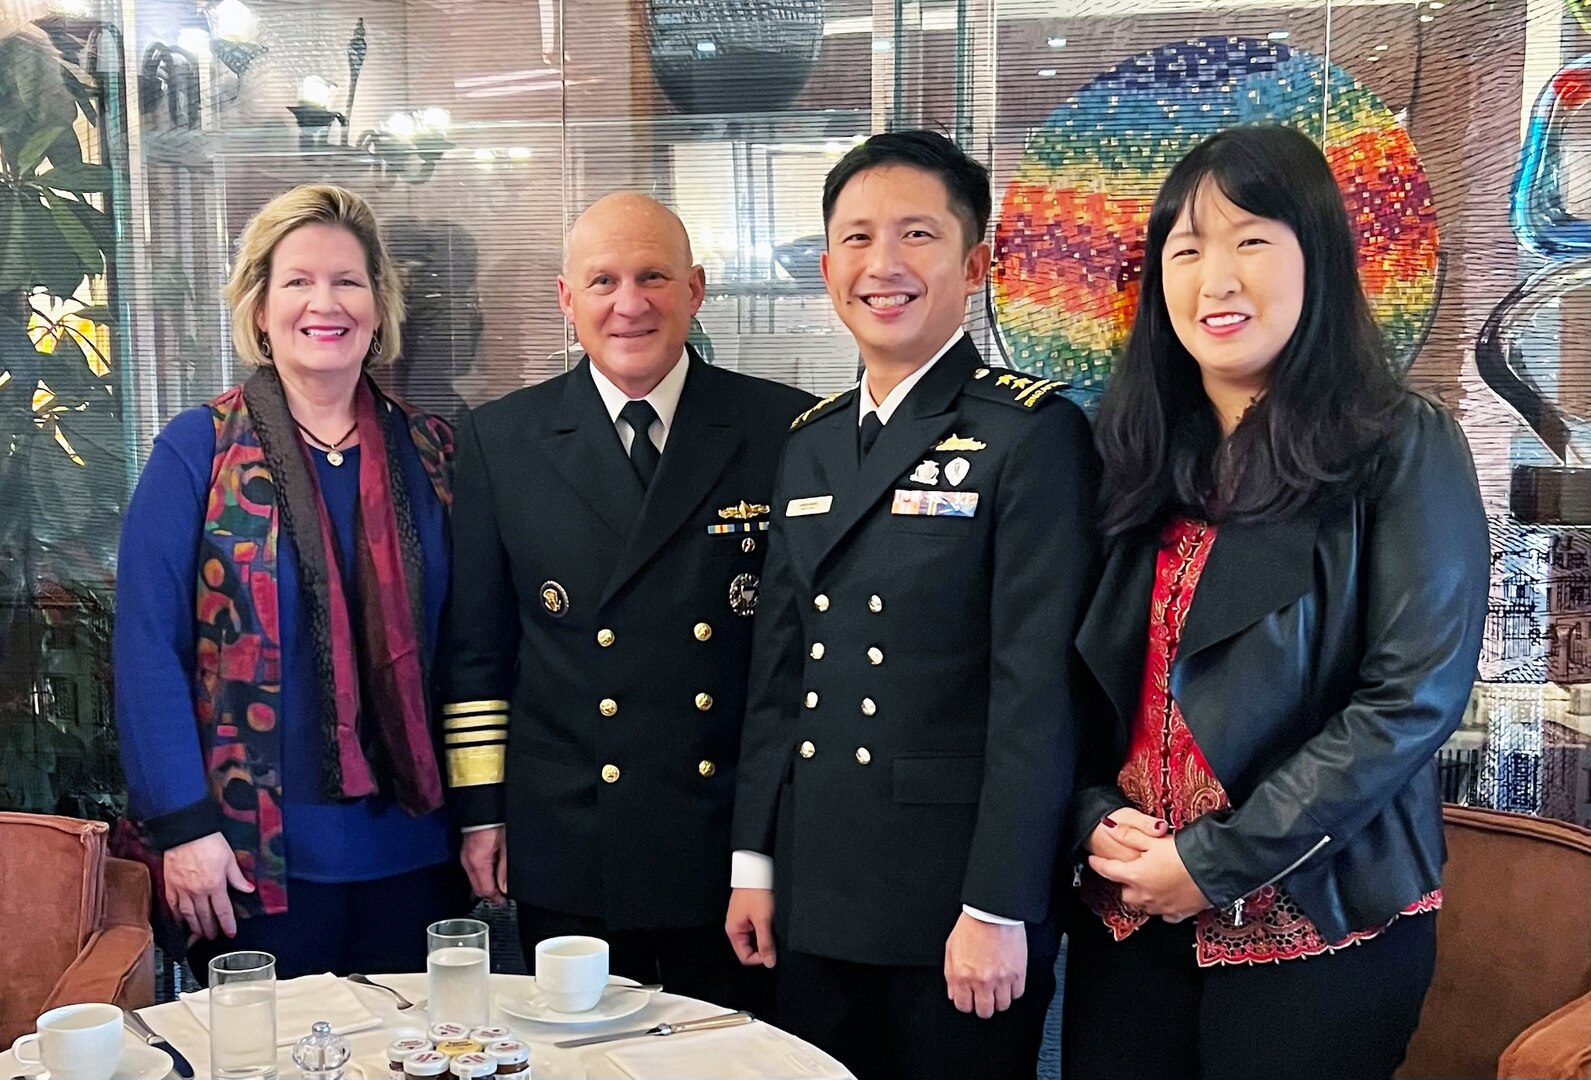 Readout of U.S. Chief of Naval Operations Adm. Mike Gilday Meeting with Singapore’s Chief of Navy Rear Adm. Aaron Beng